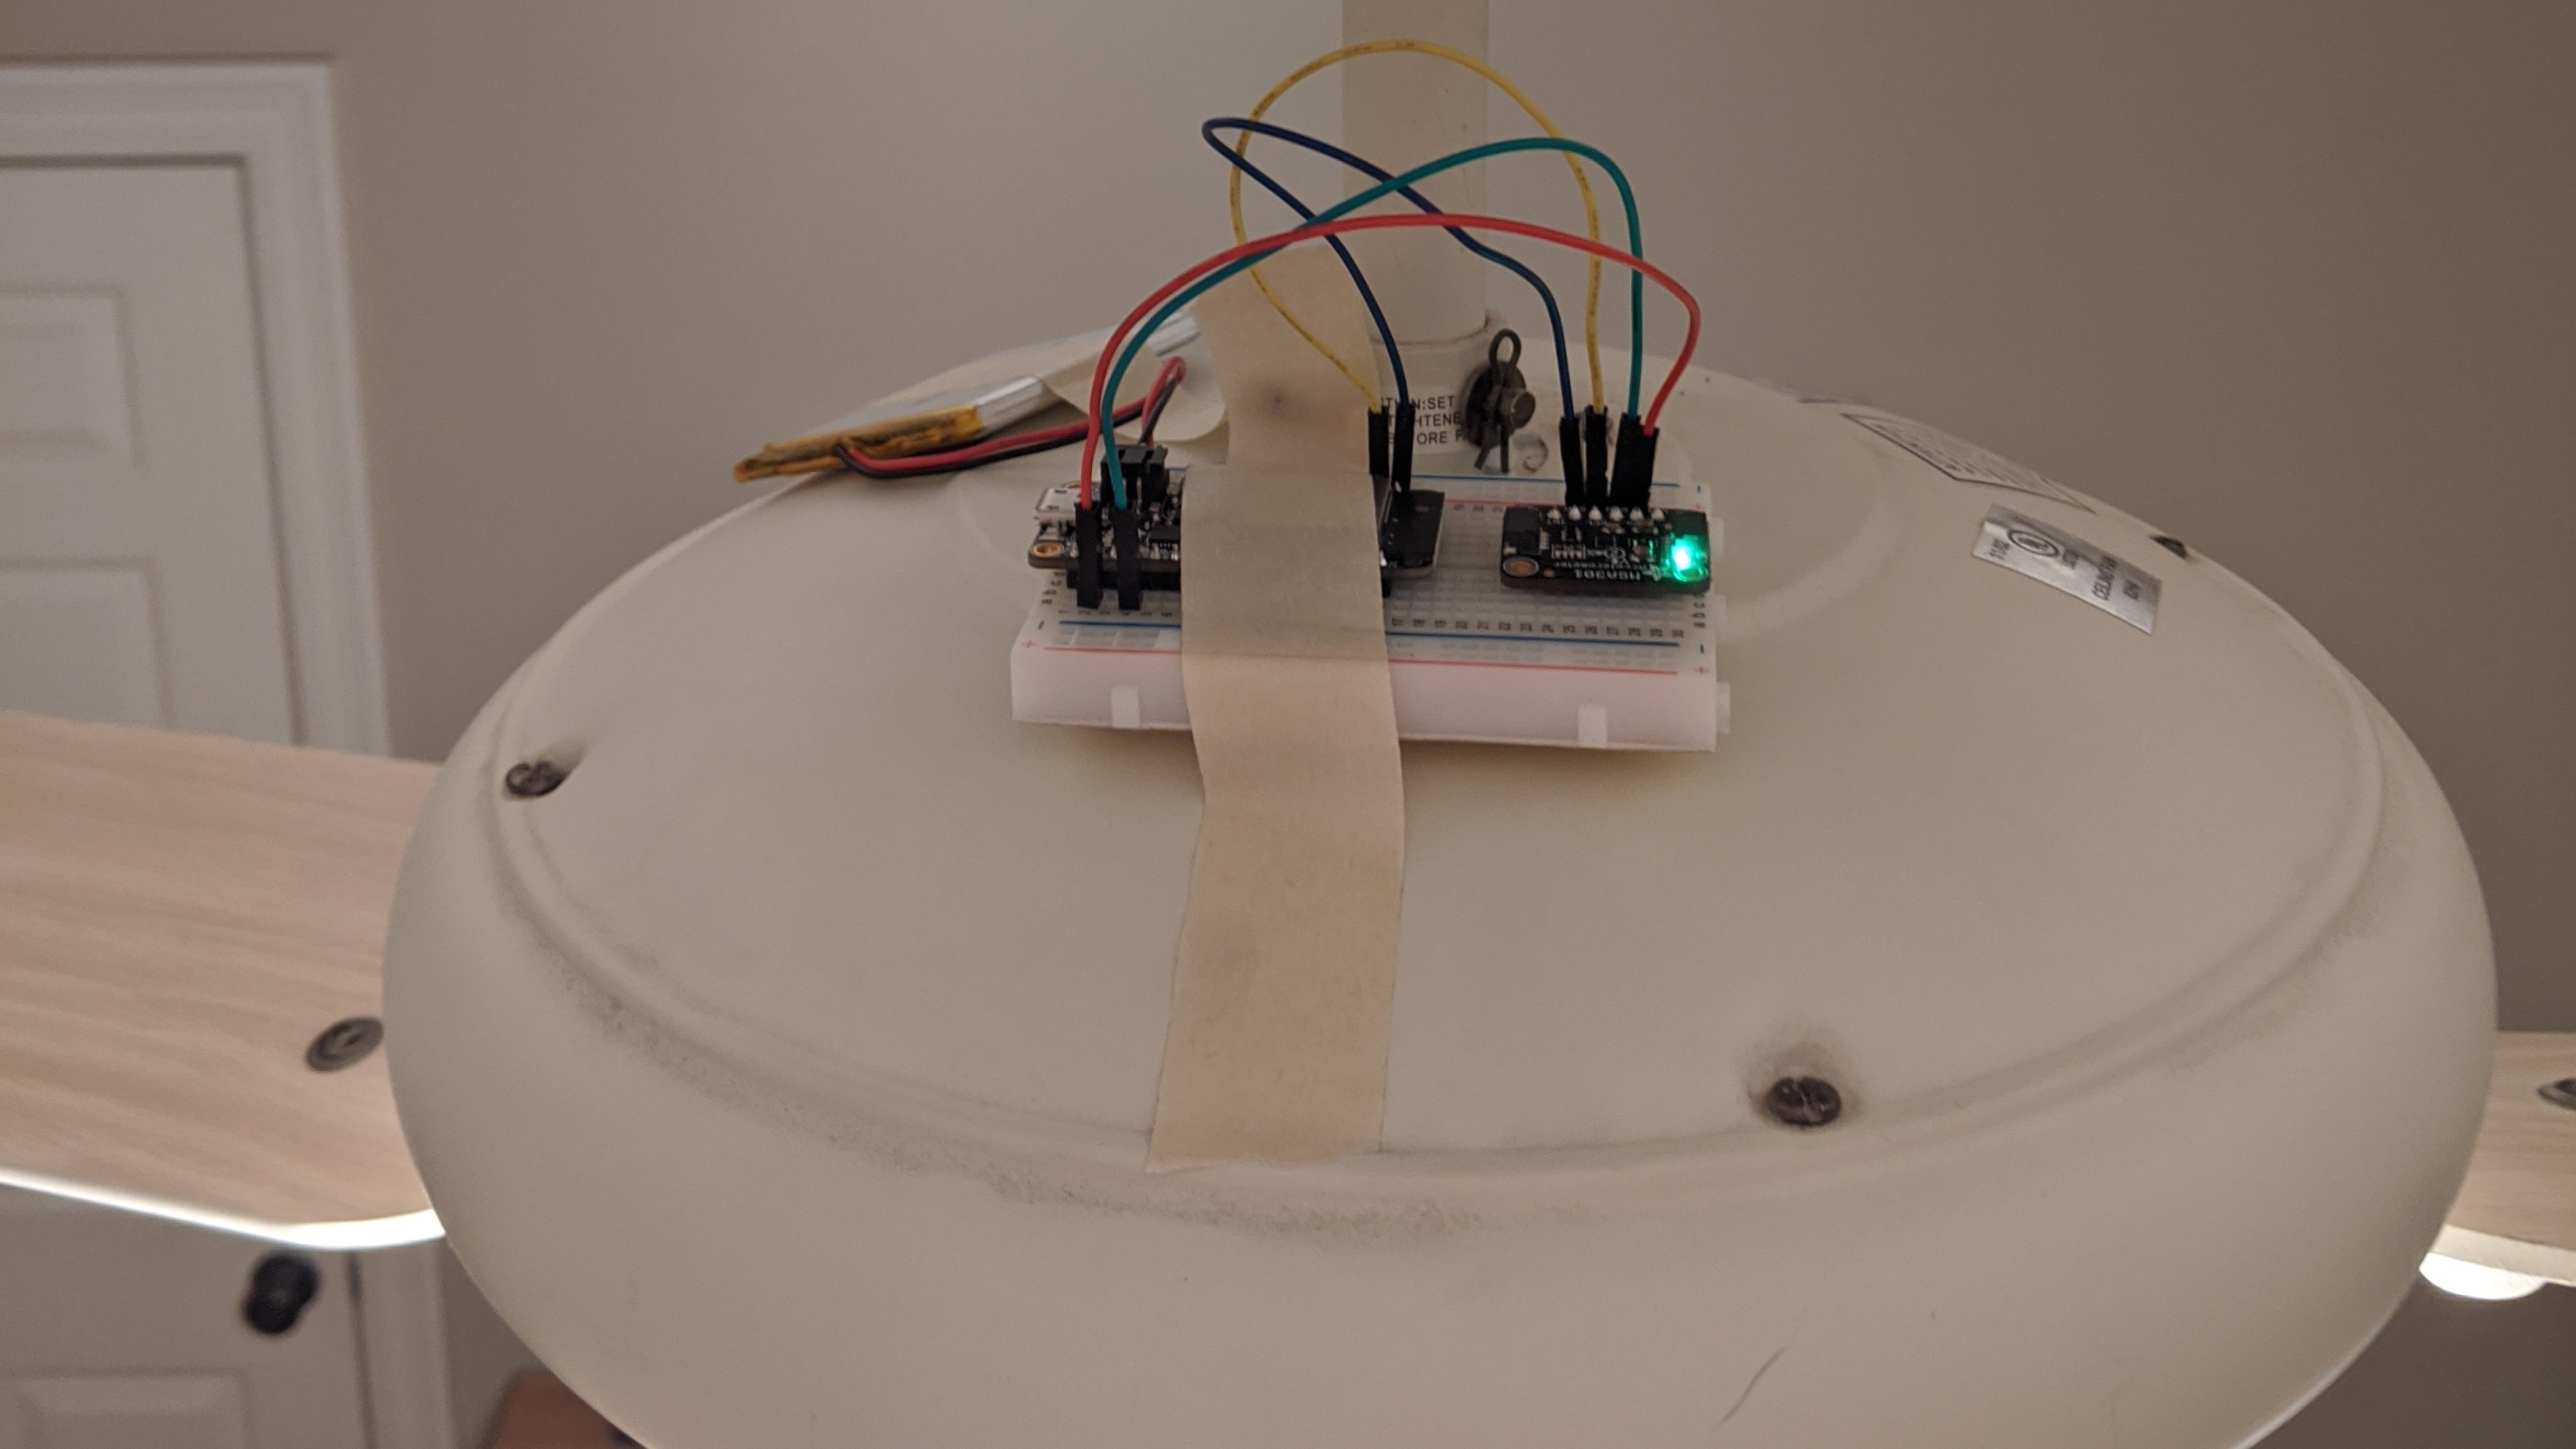 ESP32 on ceiling fan for anomaly detection